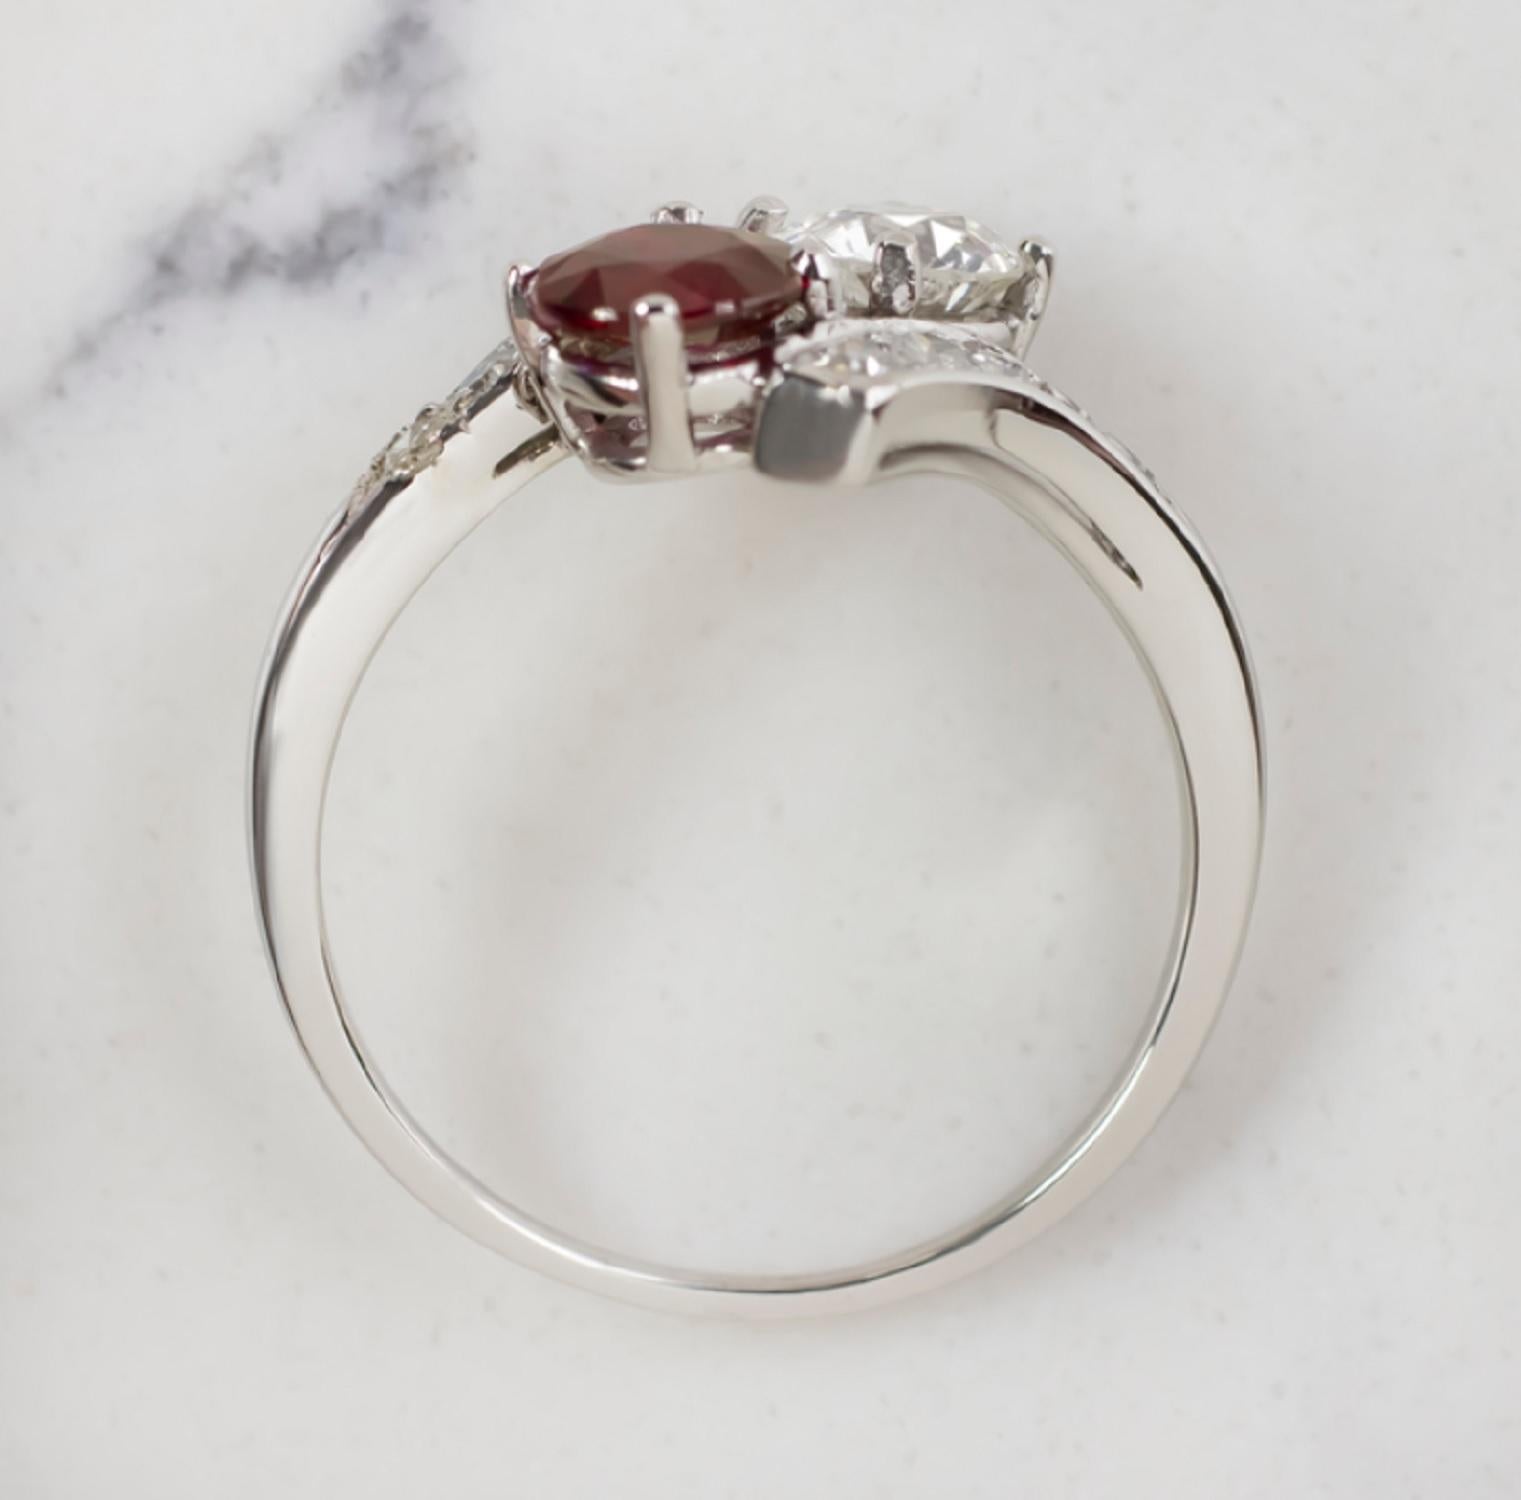 This eye-catching original vintage ruby and diamond ring offers rich contrast, and a dynamic bypass design! The ring features a rich red 0.74ct ruby paired with a vibrant 0.68ct old European cut diamond. The 0.74ct ruby center is certified as